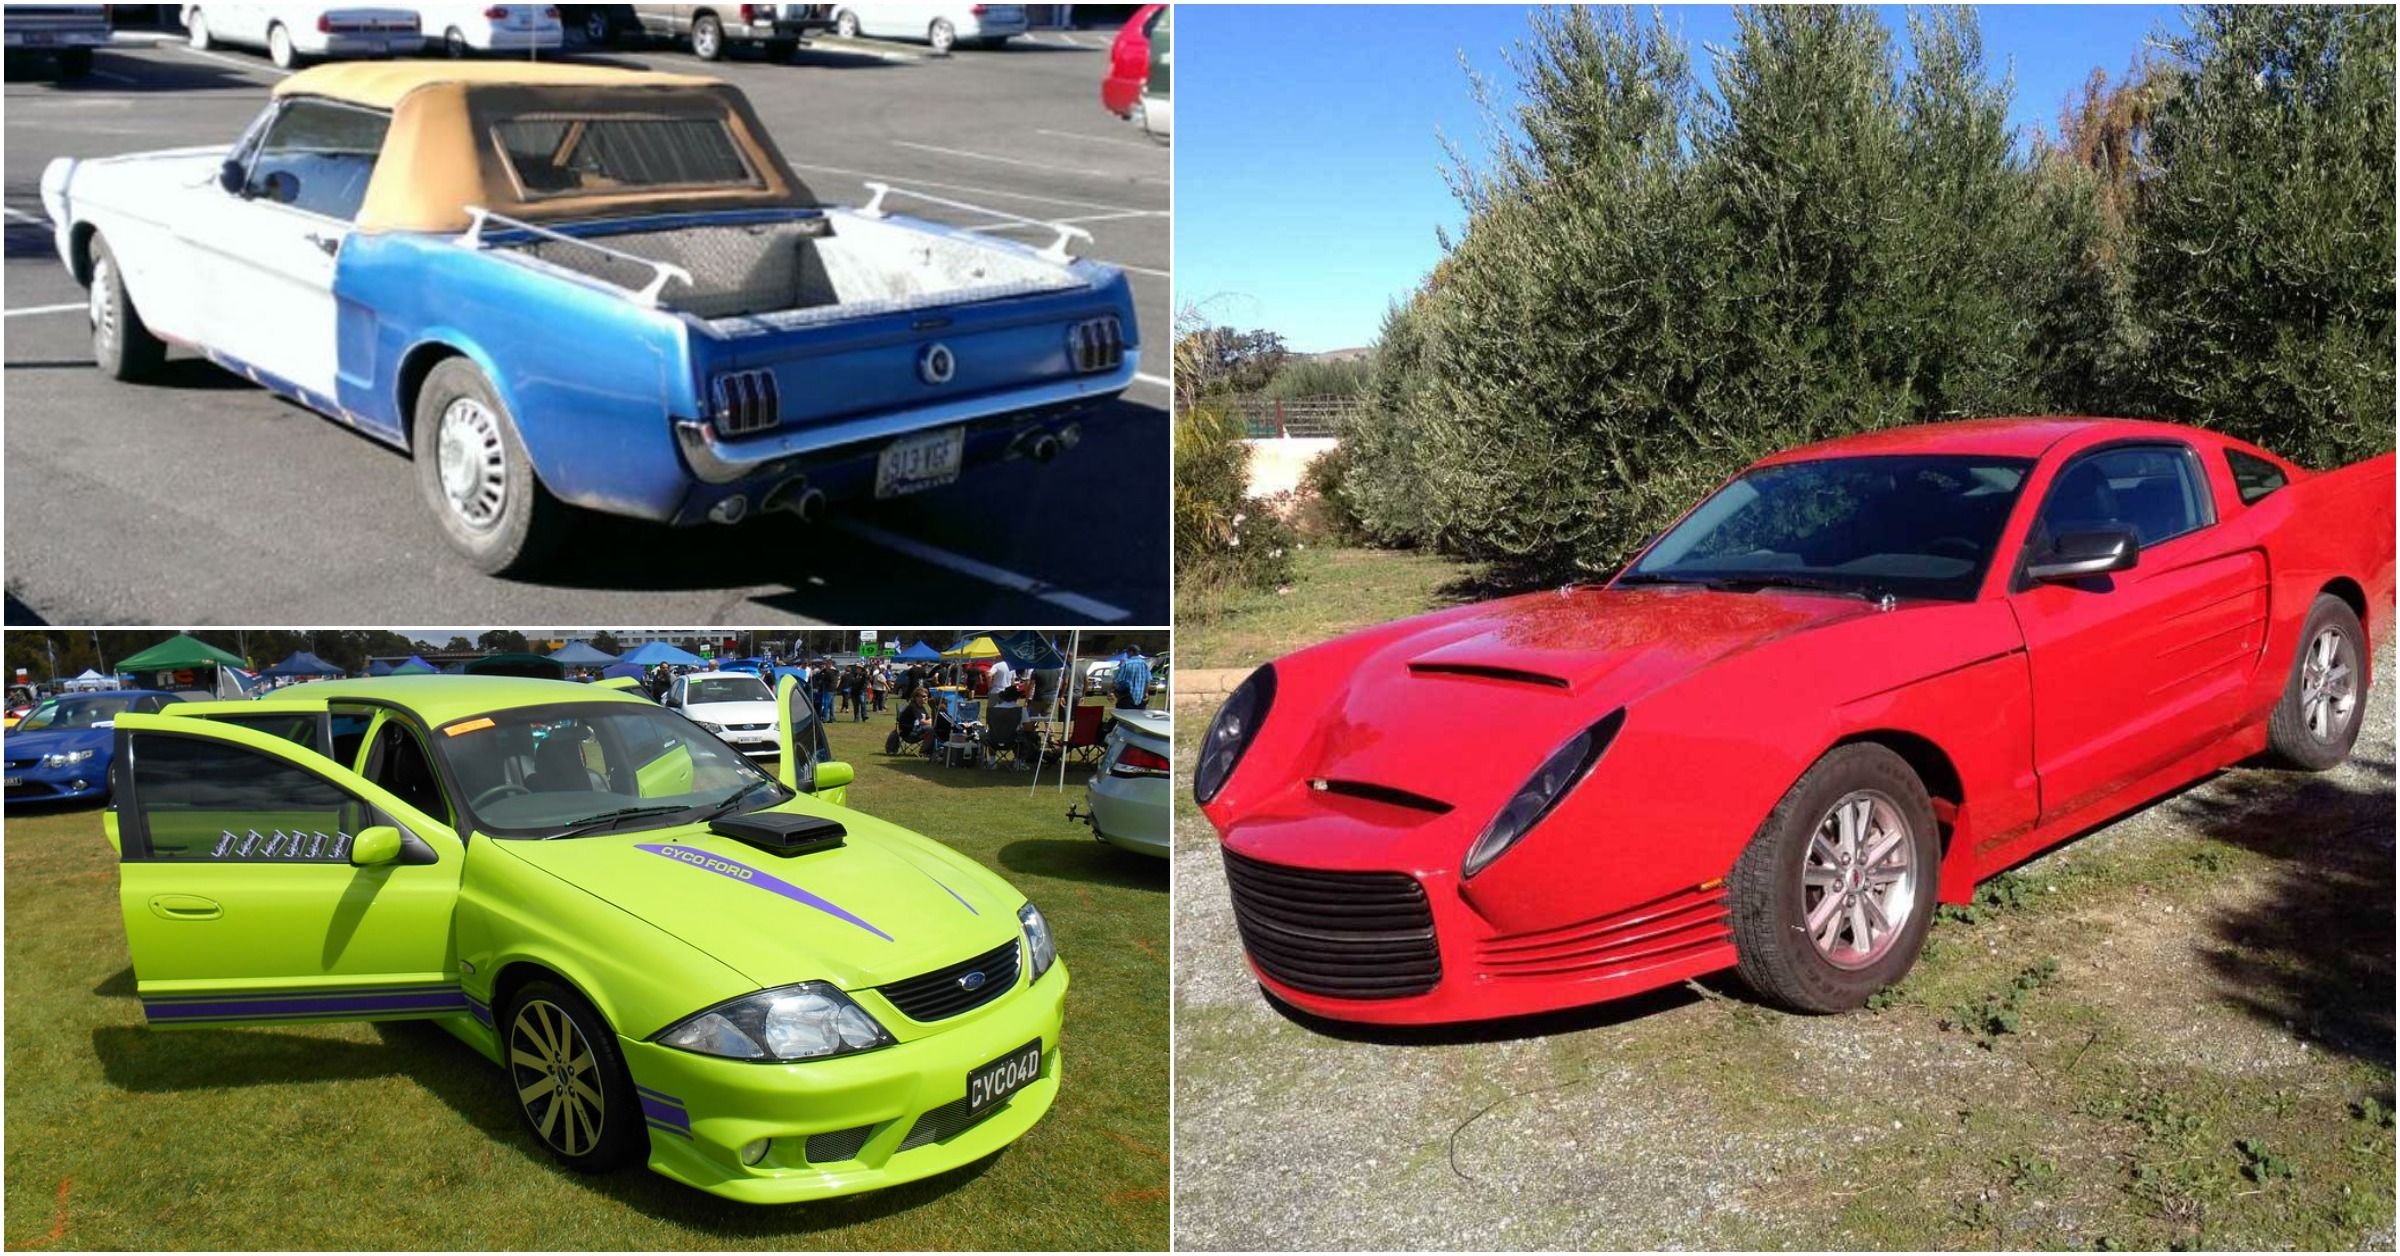 15 Of The Ugliest Modified Ford Muscle Cars | HotCars